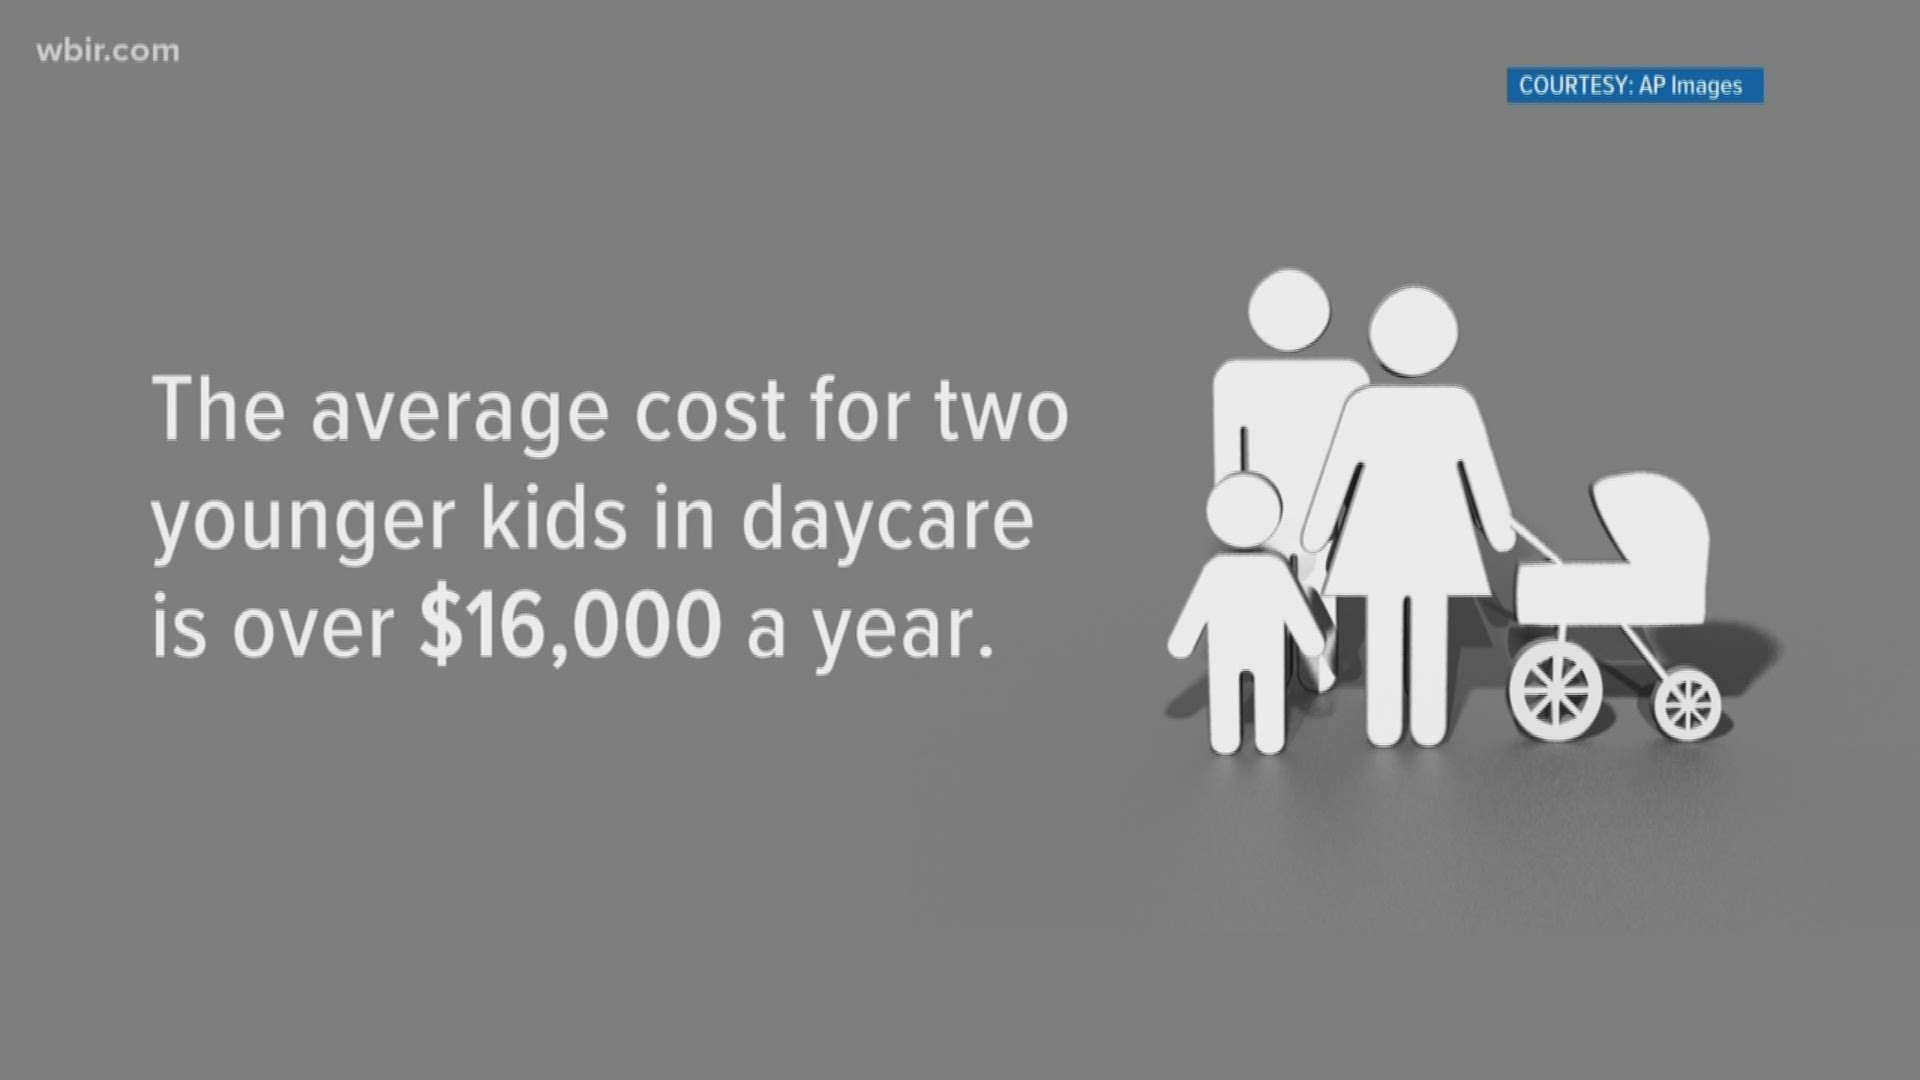 East Tennessee caregivers said the price of childcare is a huge barrier facing some parents locally and nationwide